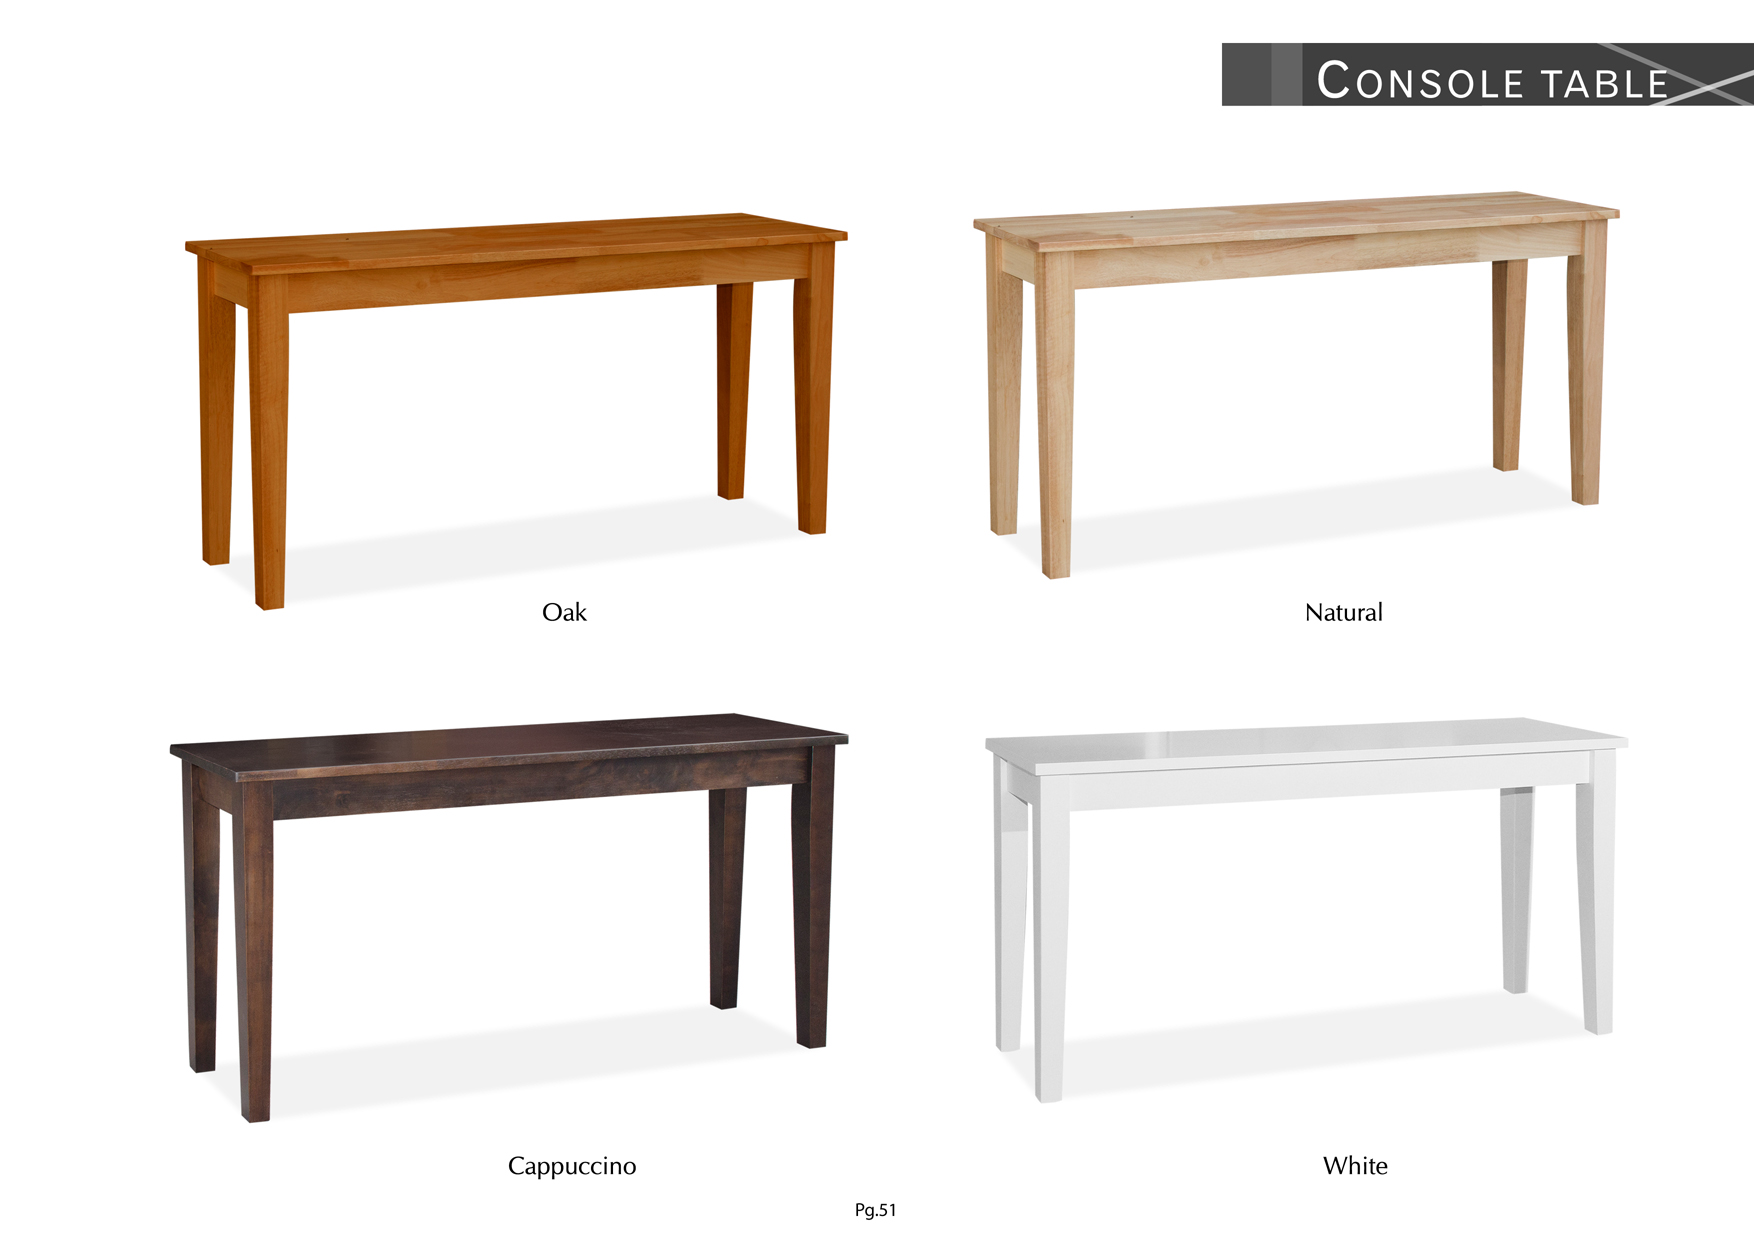 Product: PG51. SHAKER 5FT CONSOLE TABLE